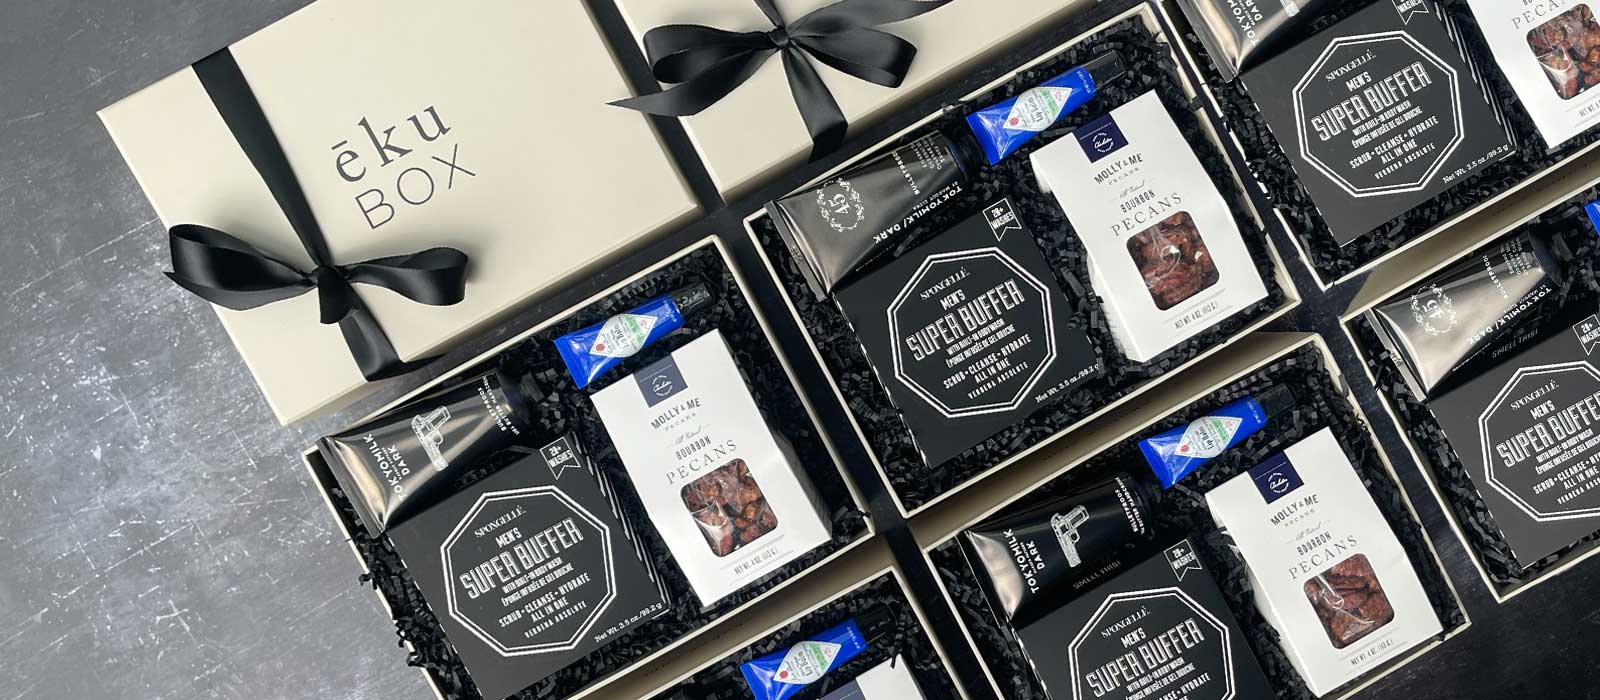 Corporate gifting at its best. Choose from  ready-to-ship gift boxes or let us create something for you. Corporate client gifts, Employee Appreciation Gifts, Corporate Event Gifts. Give them something they're going to love!